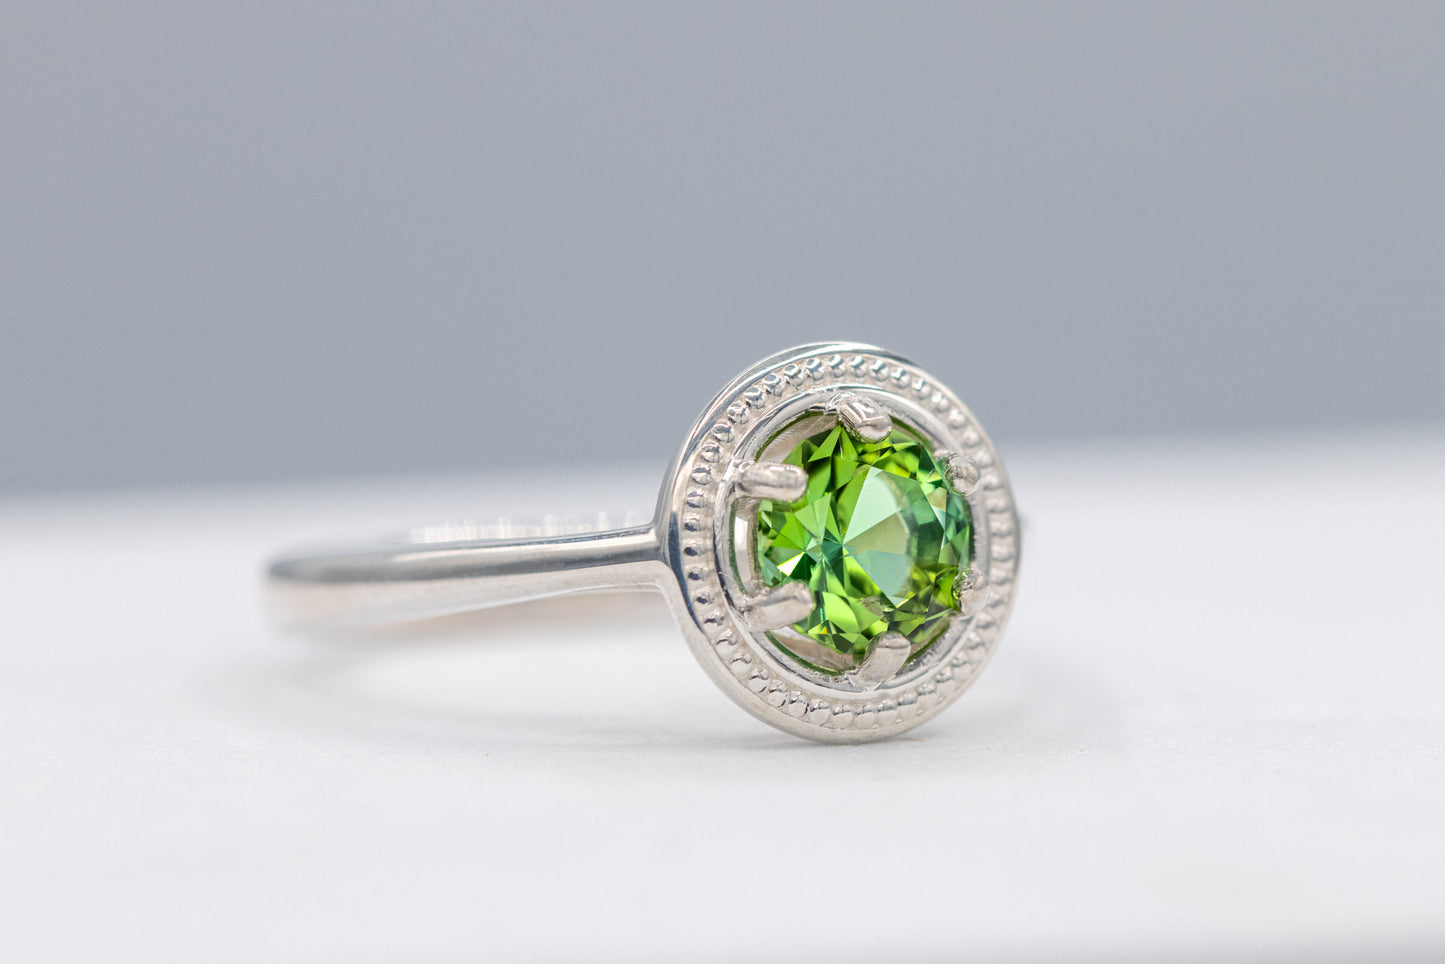 Green tourmaline Sterling Silver Ring